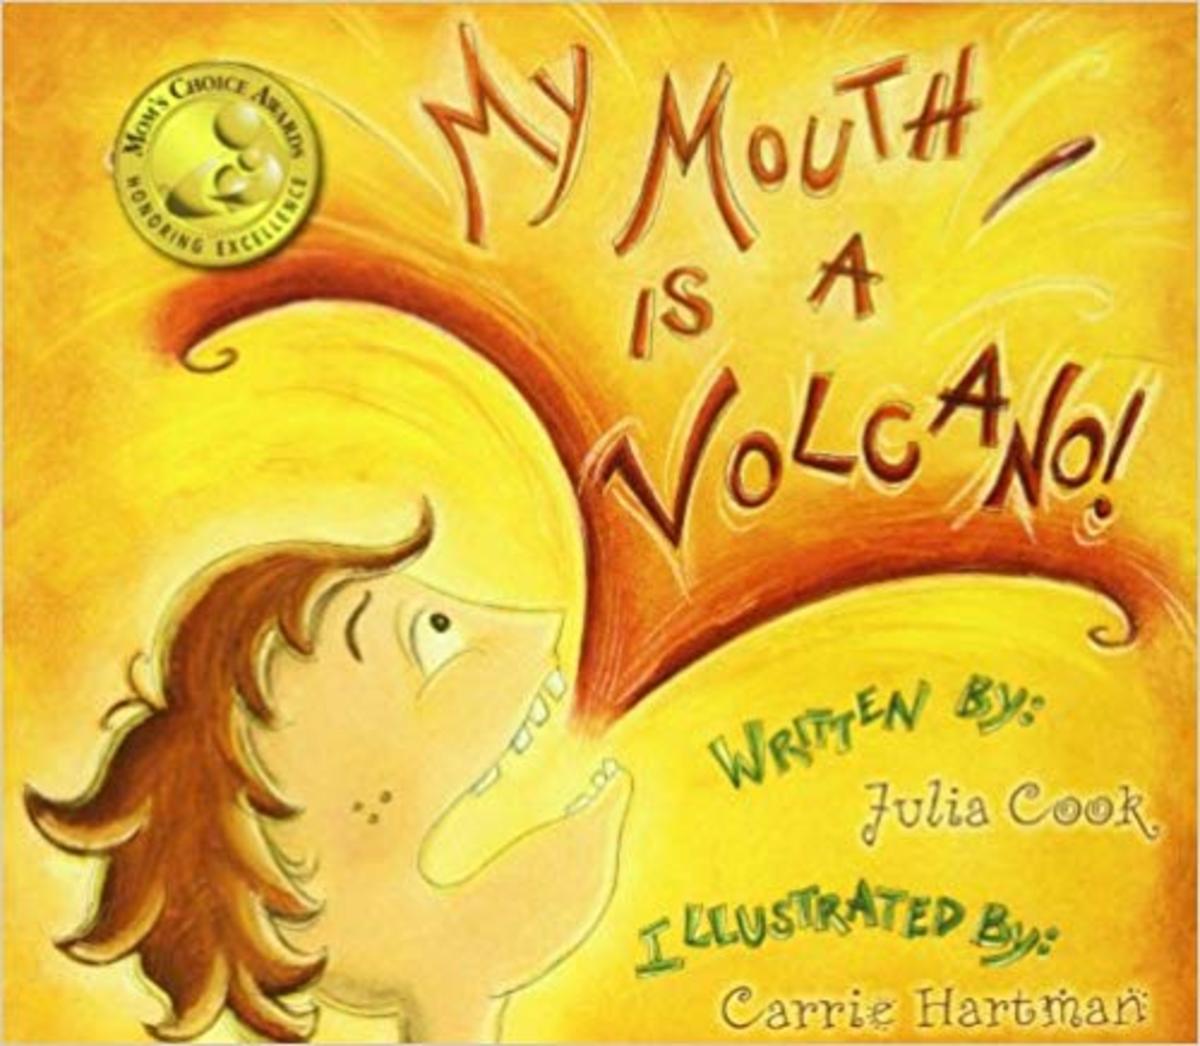 My Mouth Is a Volcano! by Julia Cook - Book images are from amazon .com.